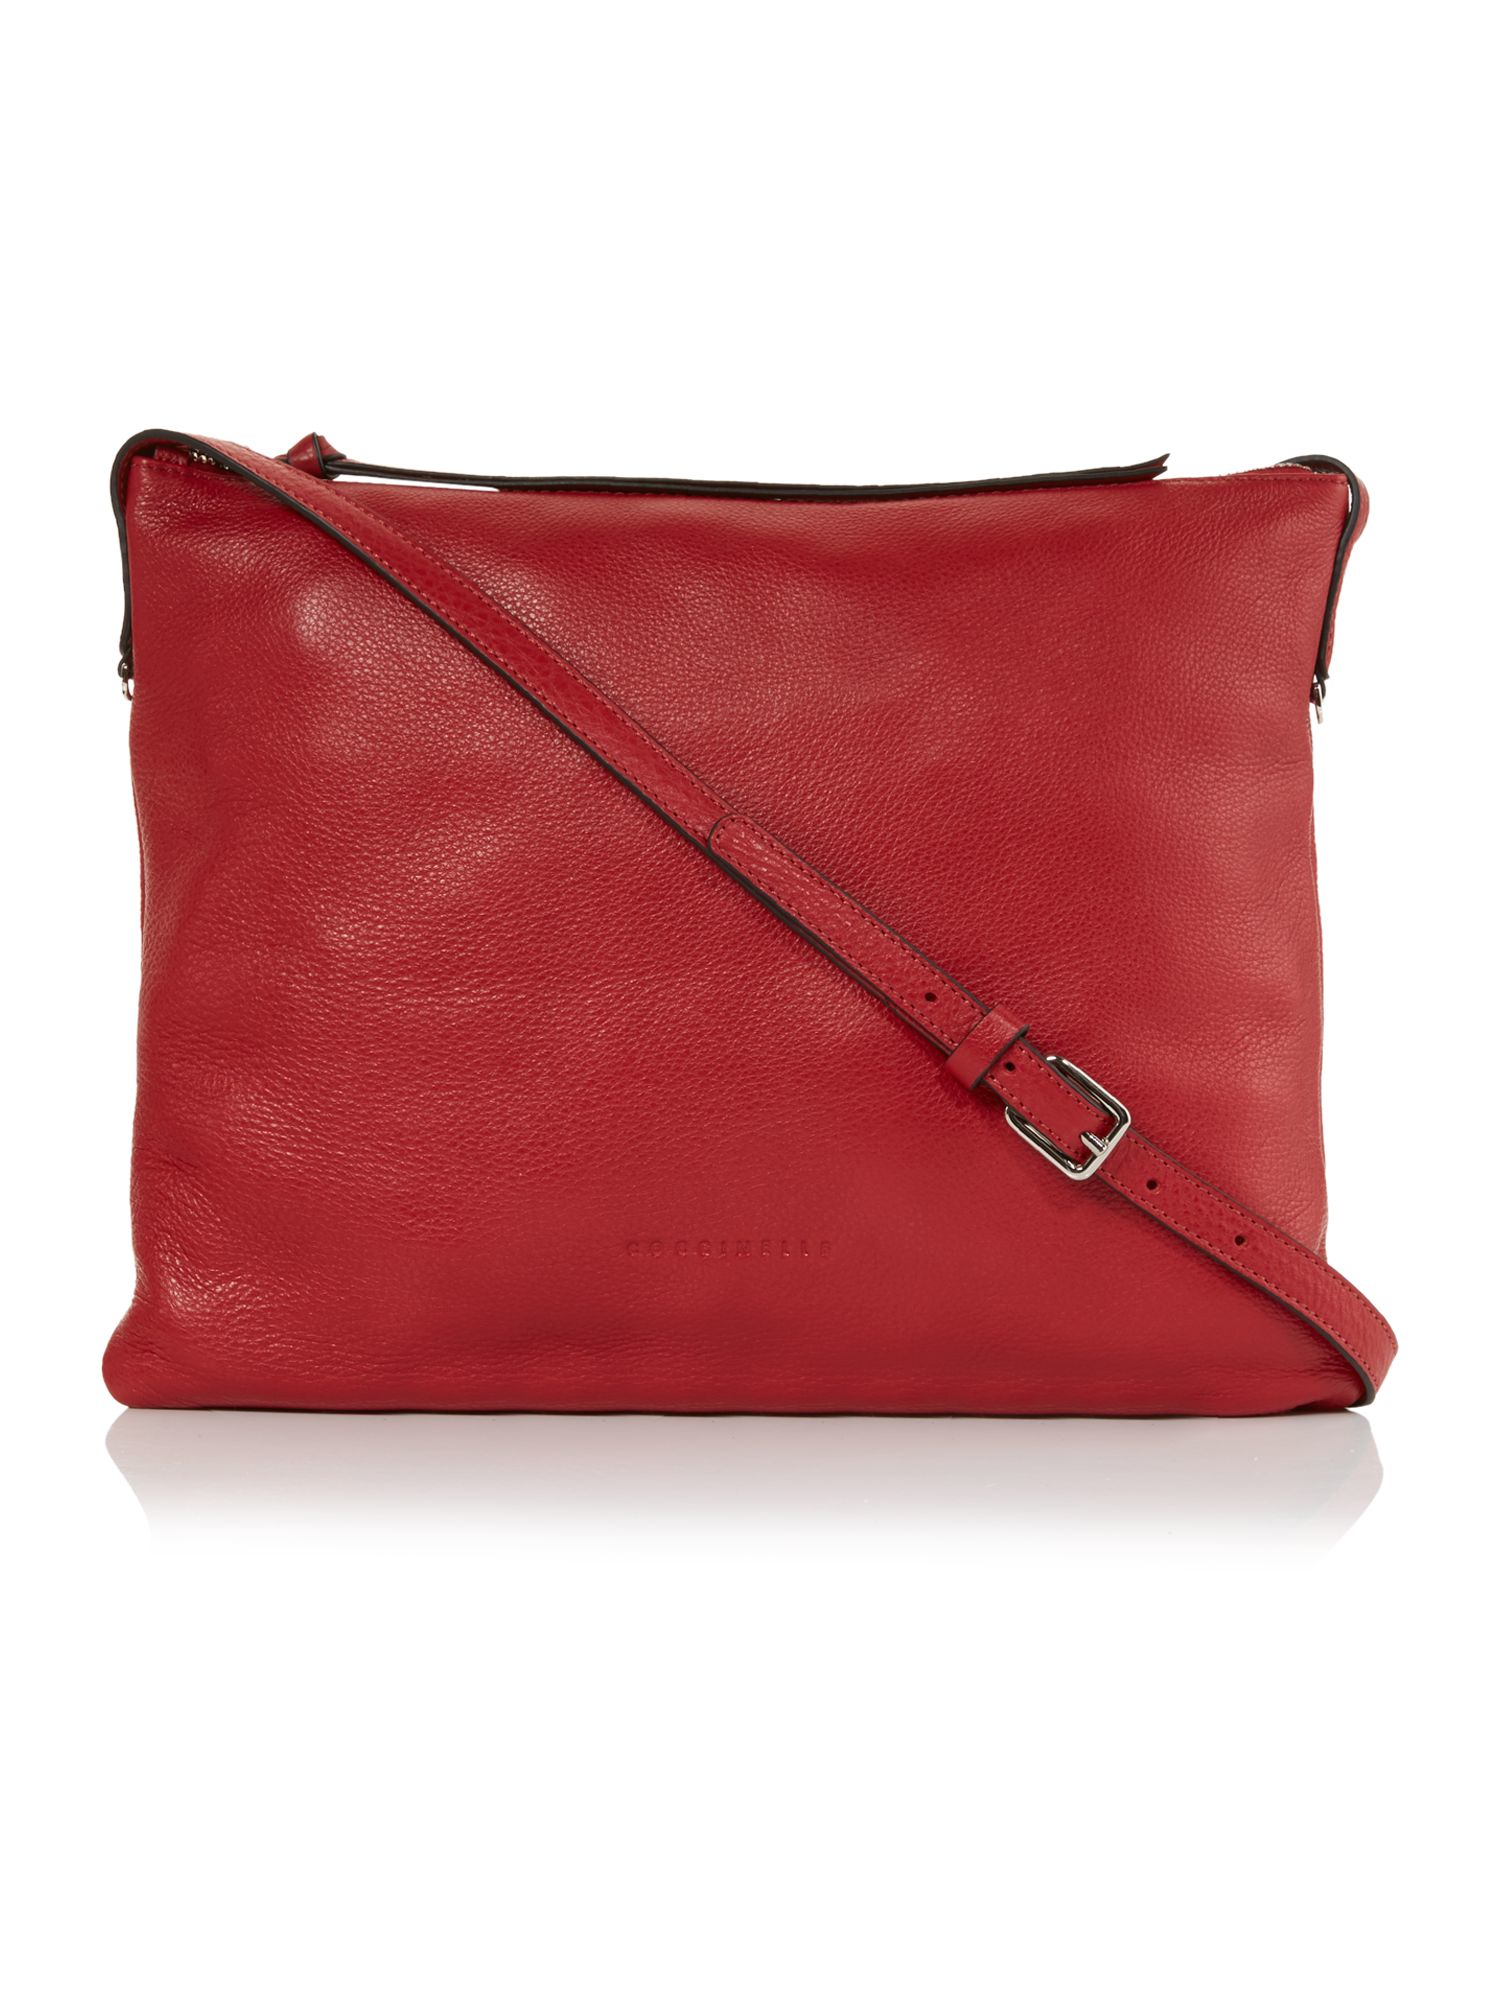 Coccinelle Mila Red Cross Body Bag in Red | Lyst